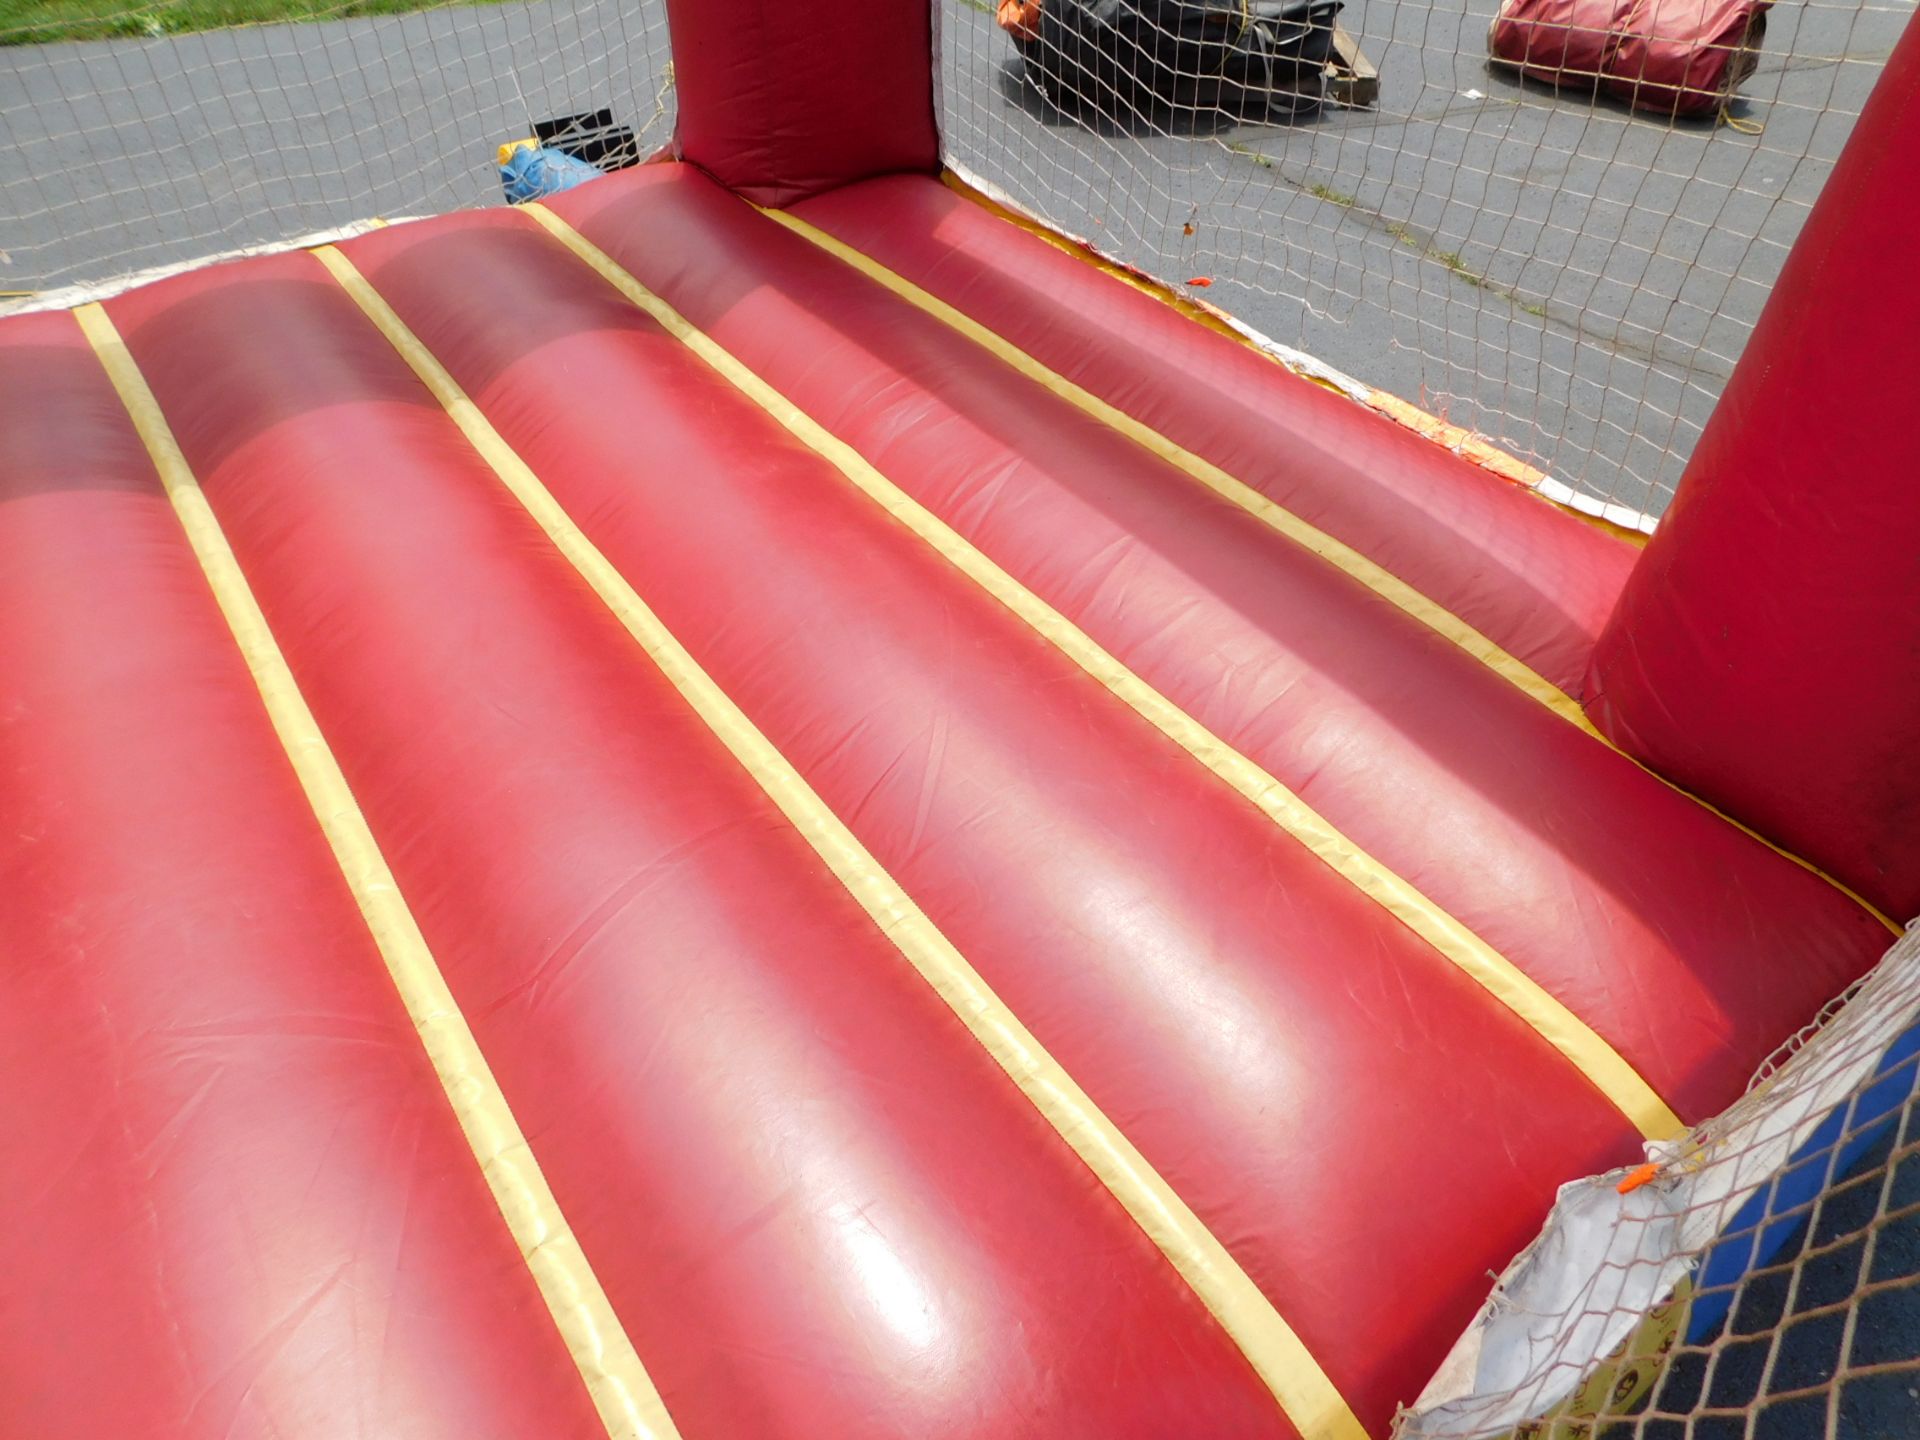 Inflatable Fun Service Bounce House, 1pc. 1 Blower required, Junior Jumper 11'WX11'LX9'H #104 - Image 9 of 12